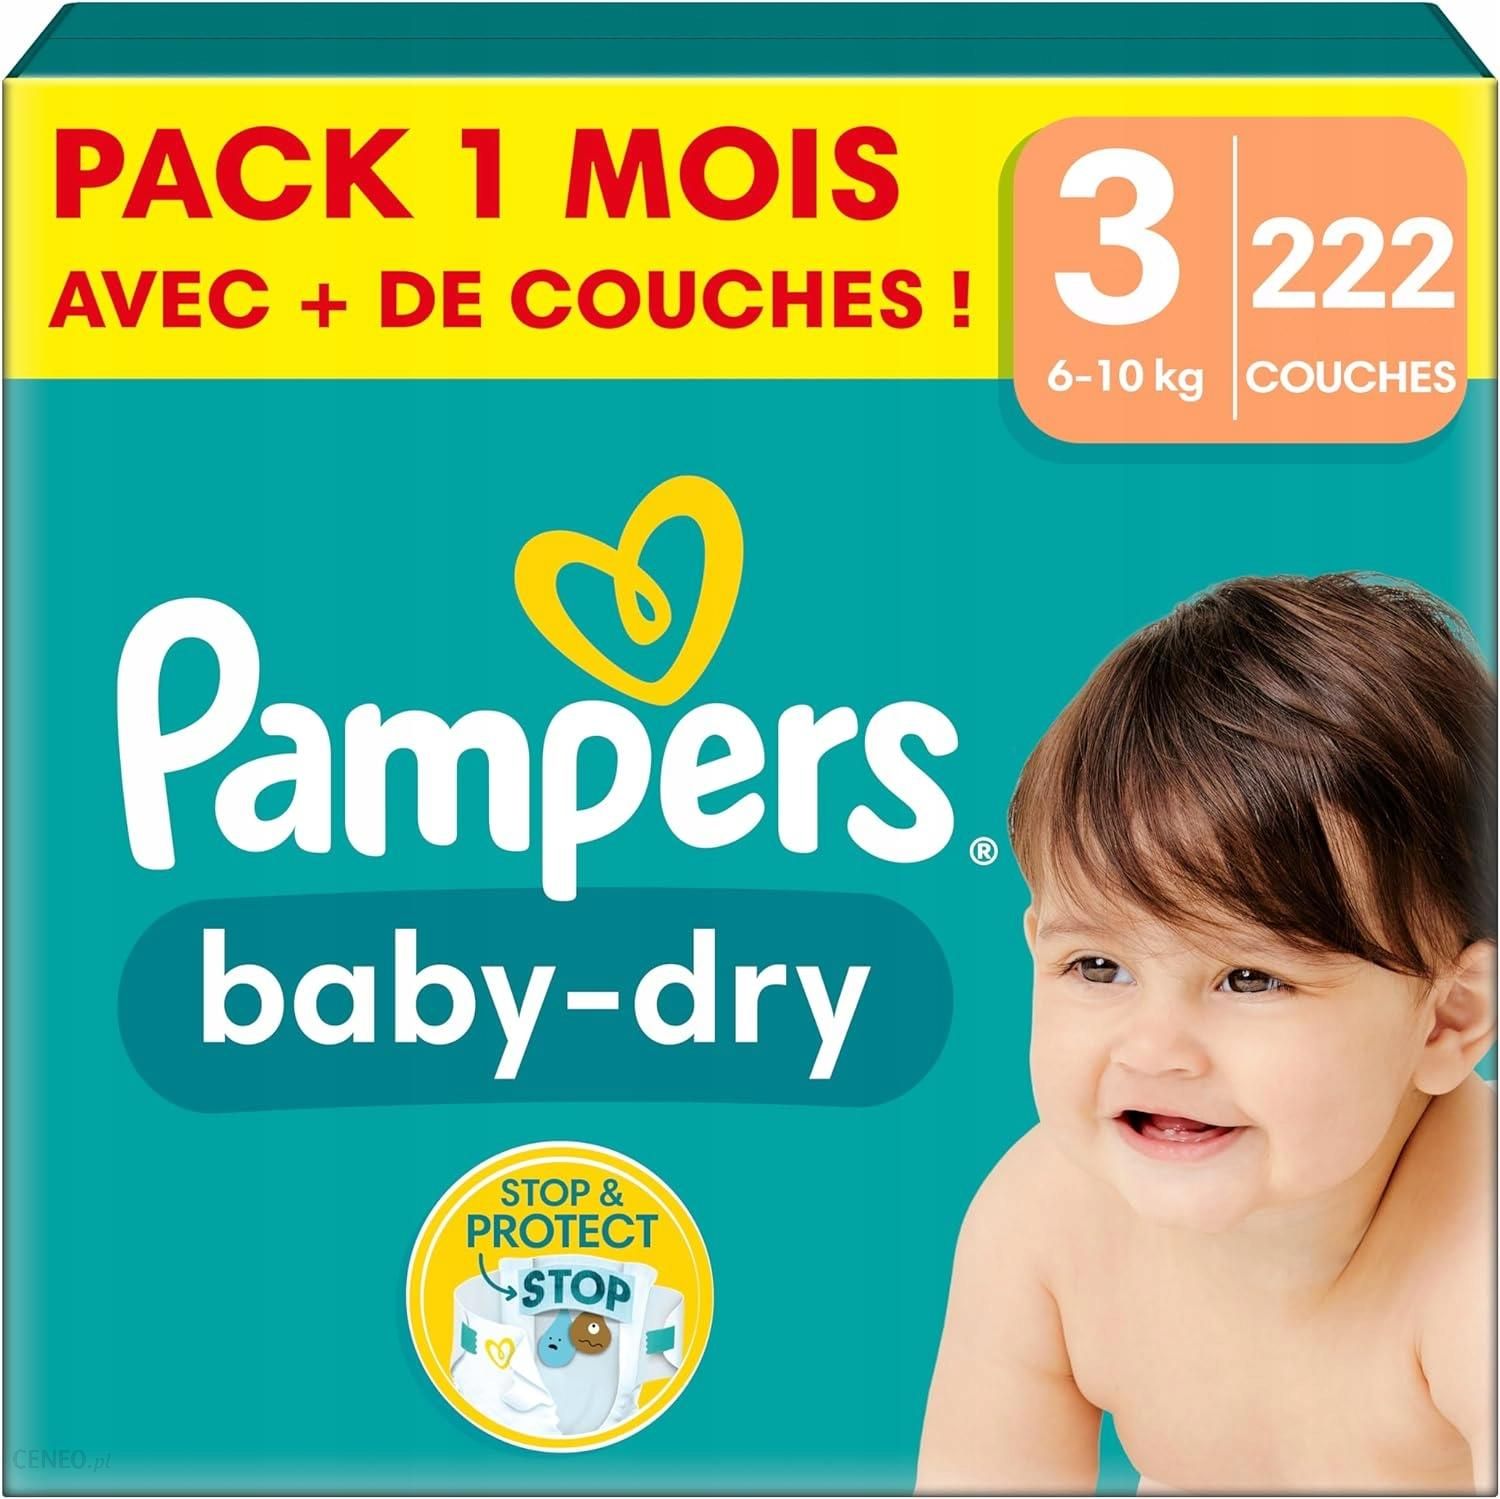 pampers simply dry ceneo